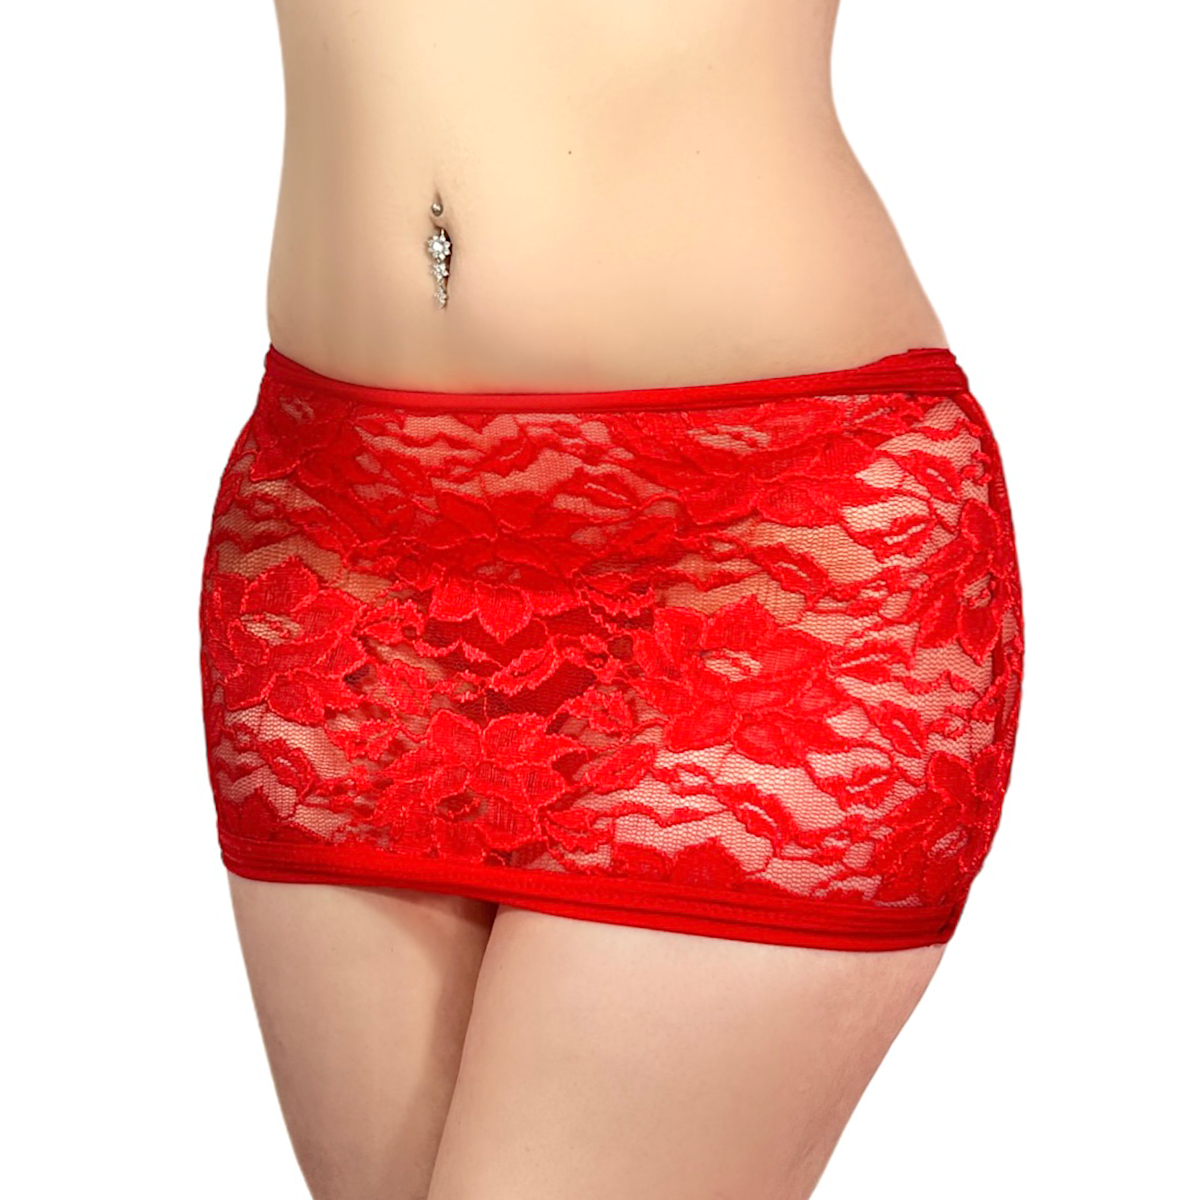 Just A Girl Lace Skirt Set: Red